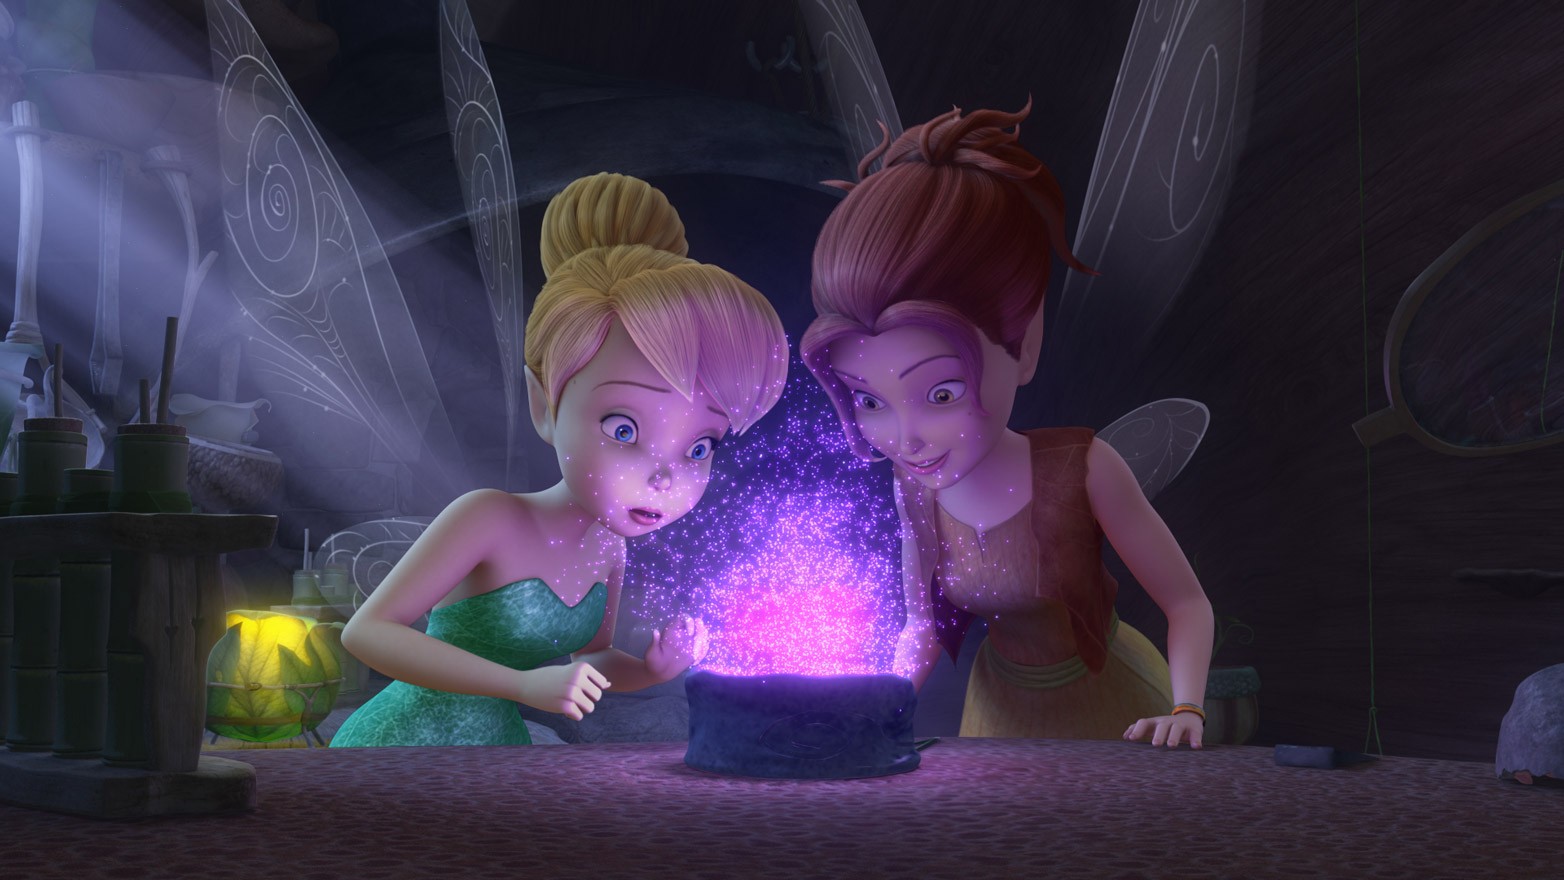 Zarina and Tinker Bell from Walt Disney Pictures' The Pirate Fairy (2014)